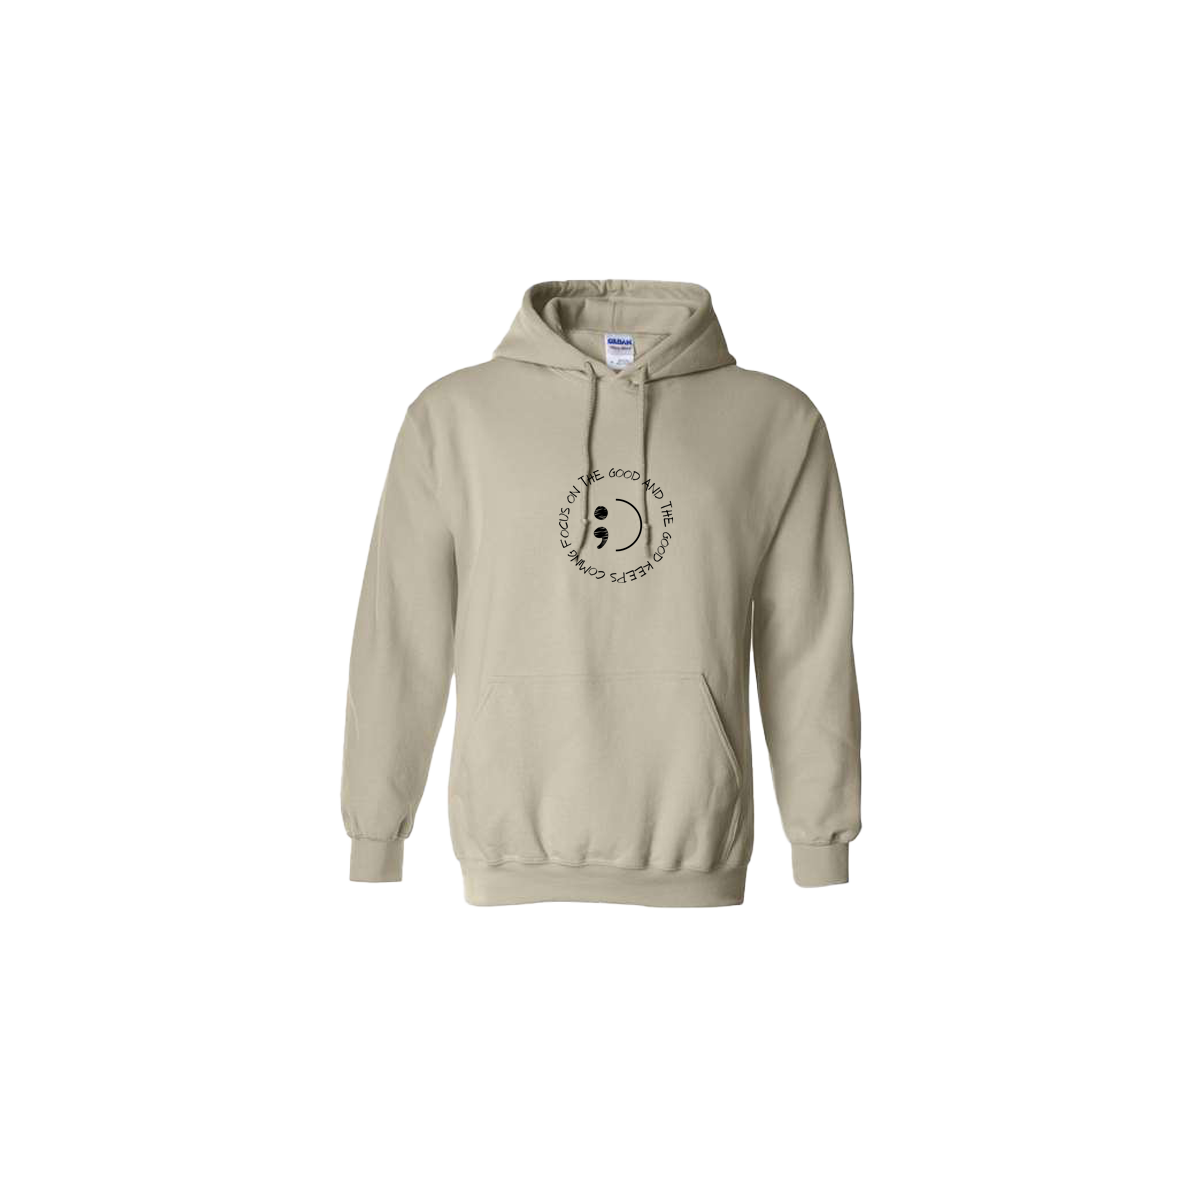 Focus on The Good And The Good Keeps Coming Embroidered Beige Hoodie - Mental Health Awareness Clothing